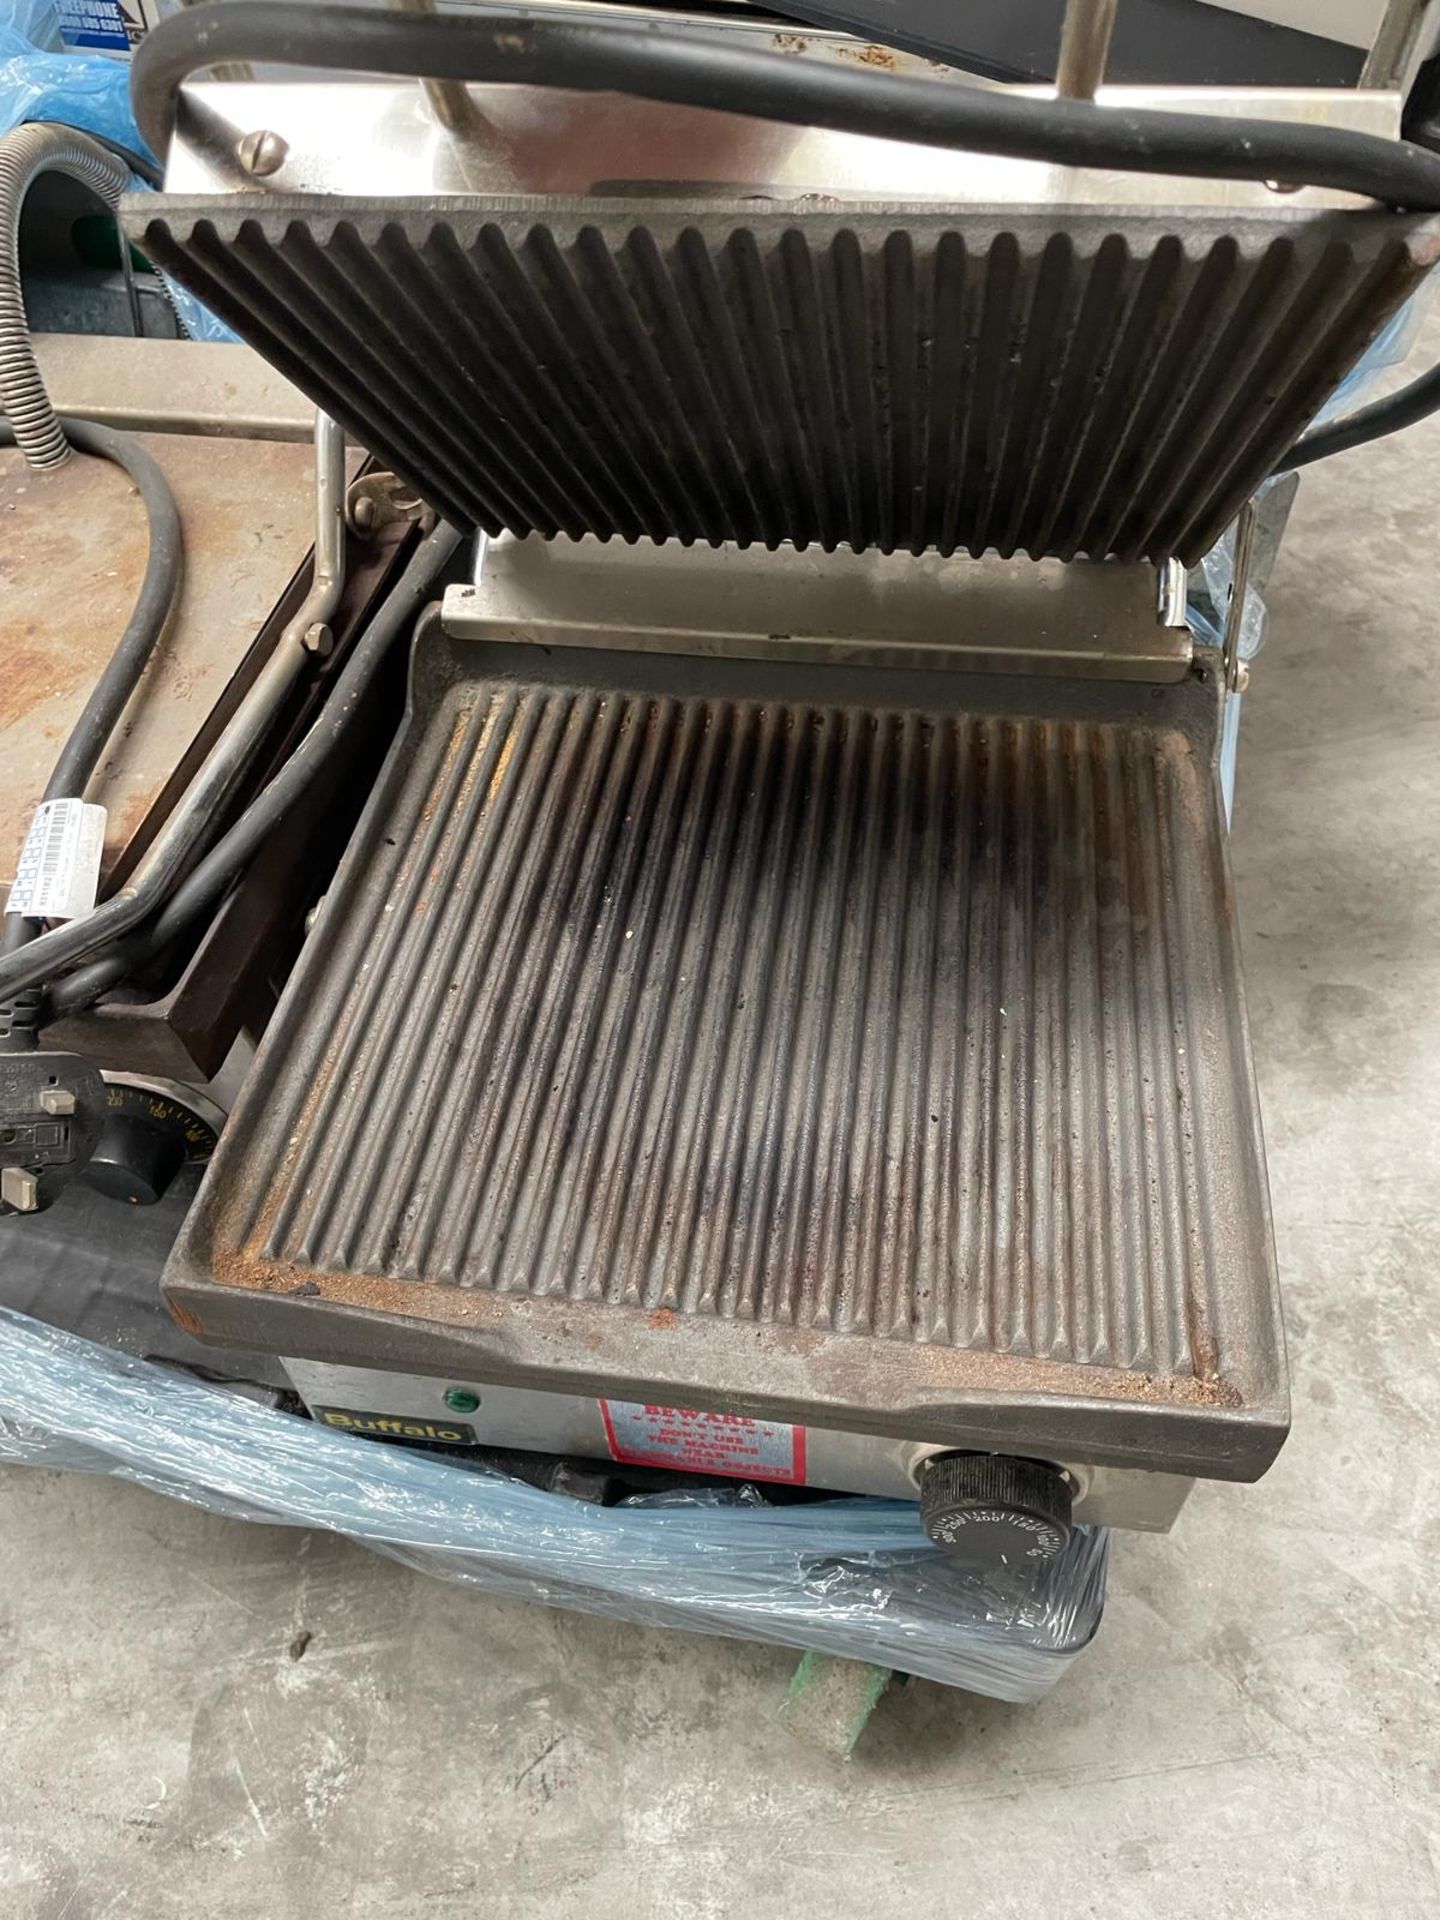 Buffalo 1 x Hot plate 1 x ridged griddle. 250 x 250 mm. Please note this lot is located at Unit - Image 4 of 5